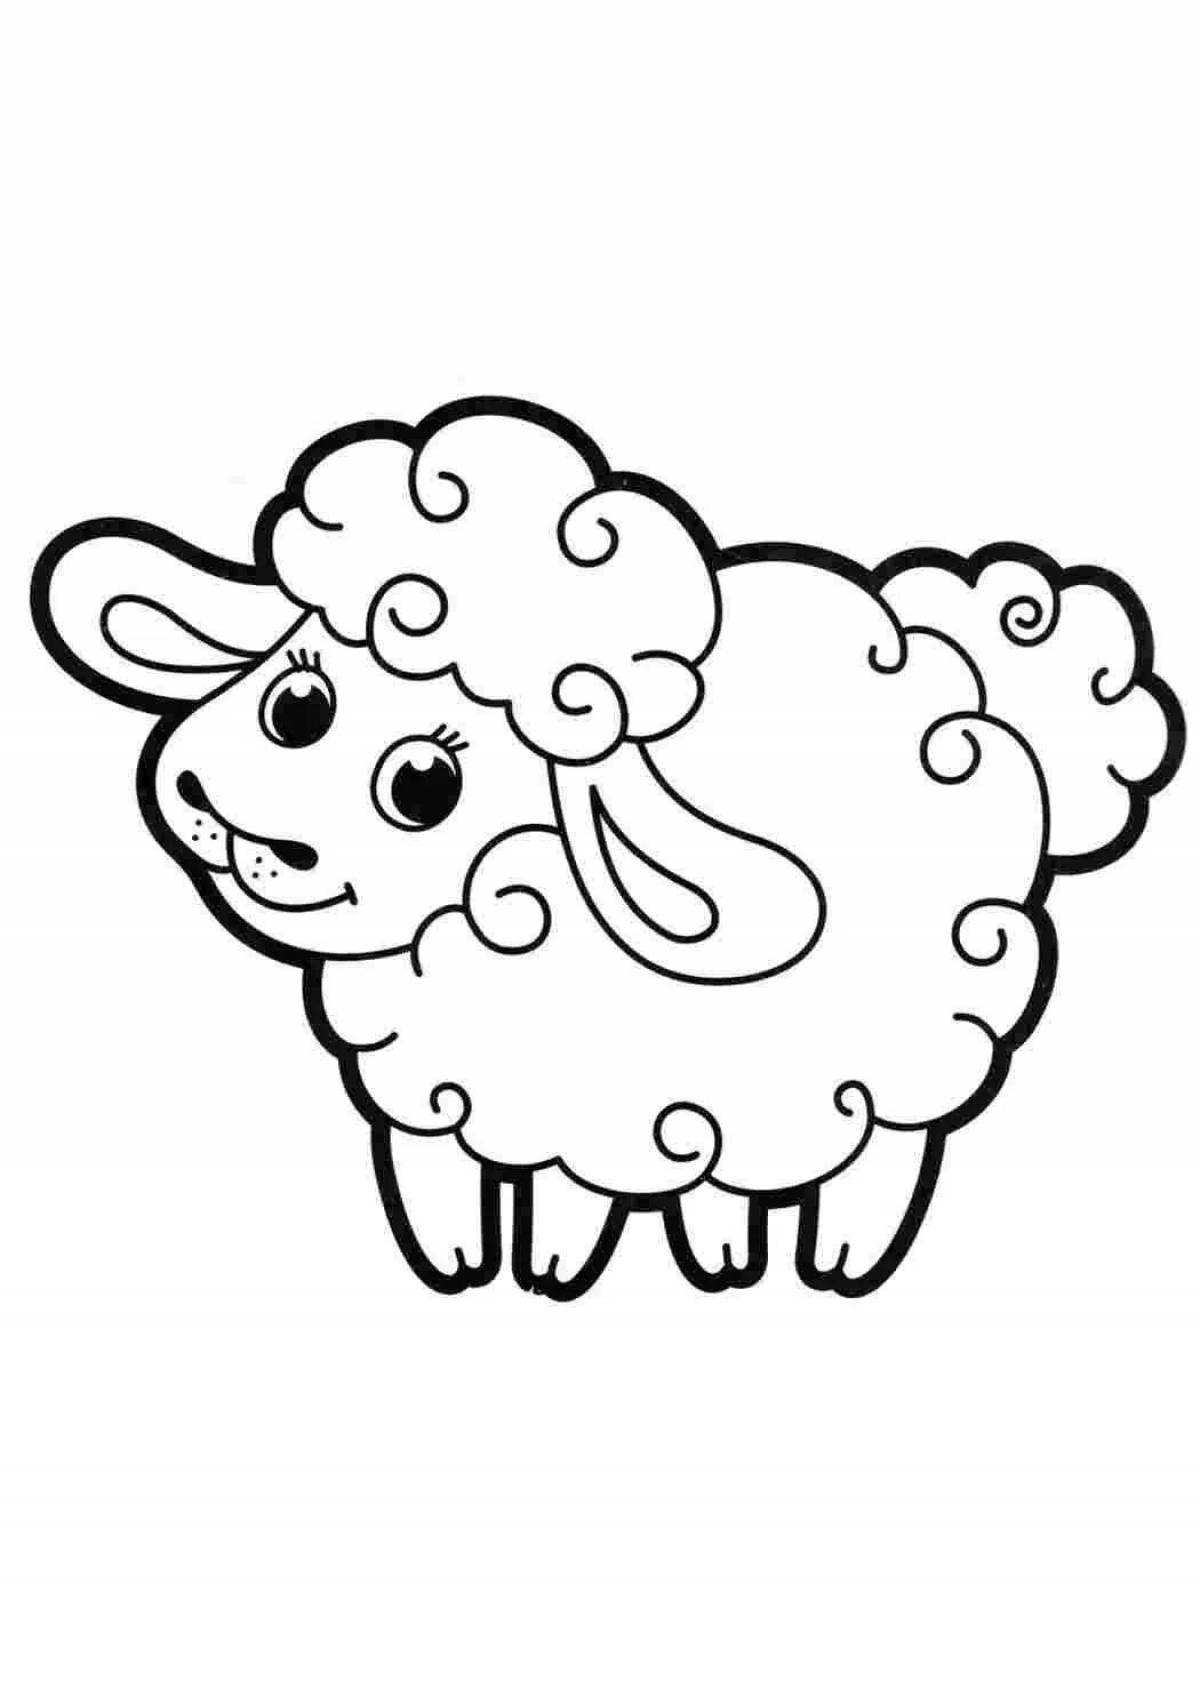 Nice sheep coloring book for 4-5 year olds